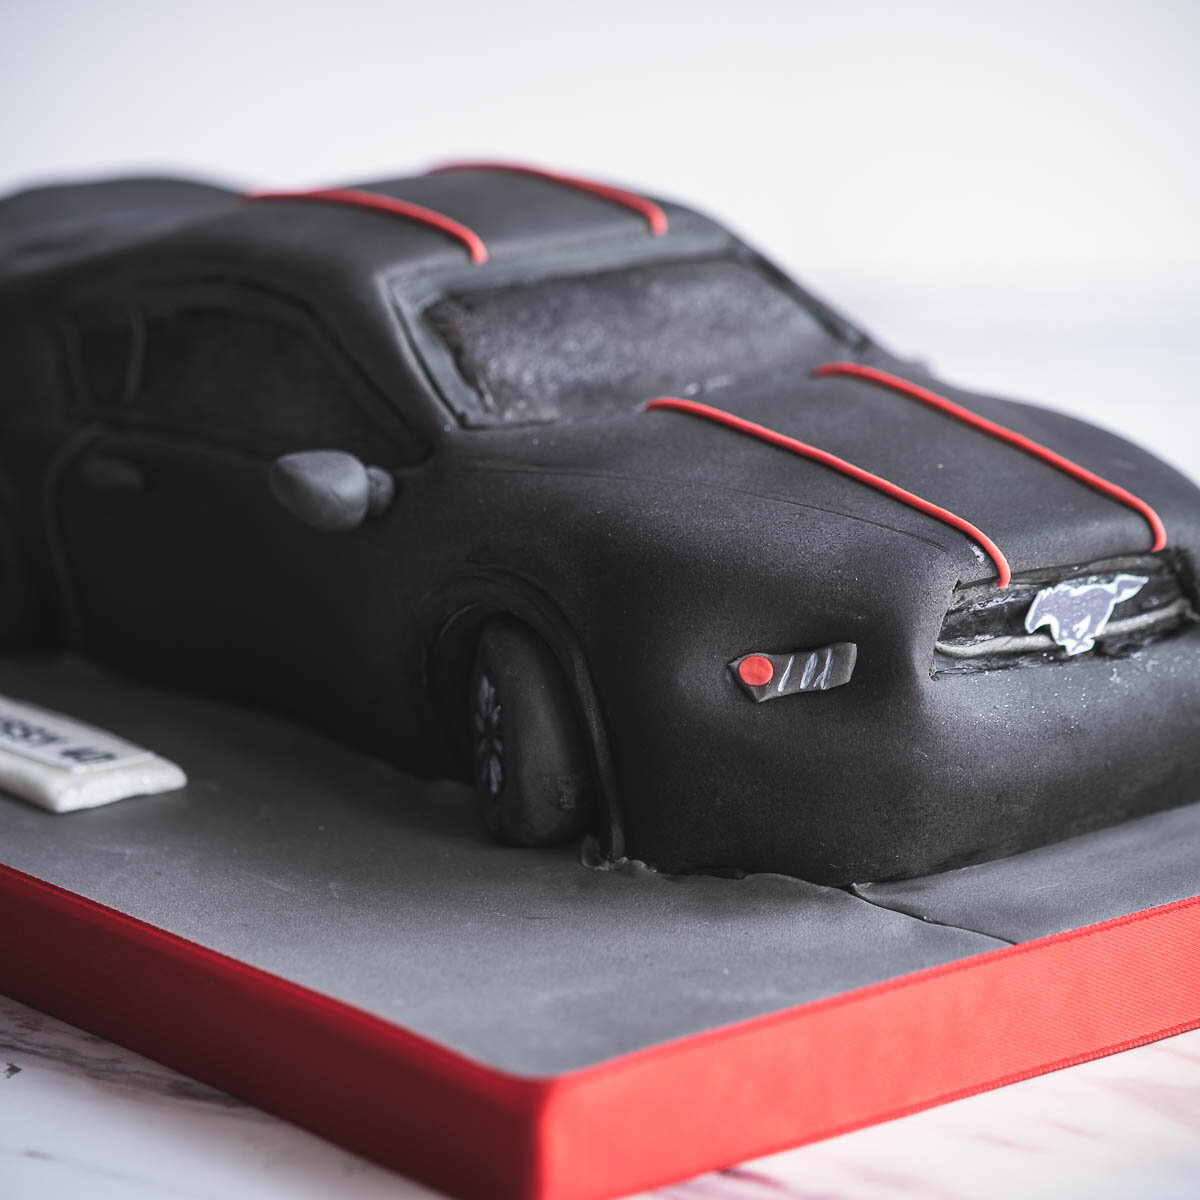 Brian & Jen brought this cool dirt cake that Jen decorated with Matchbox  cars | The Greater Pittsburgh Mustang Club